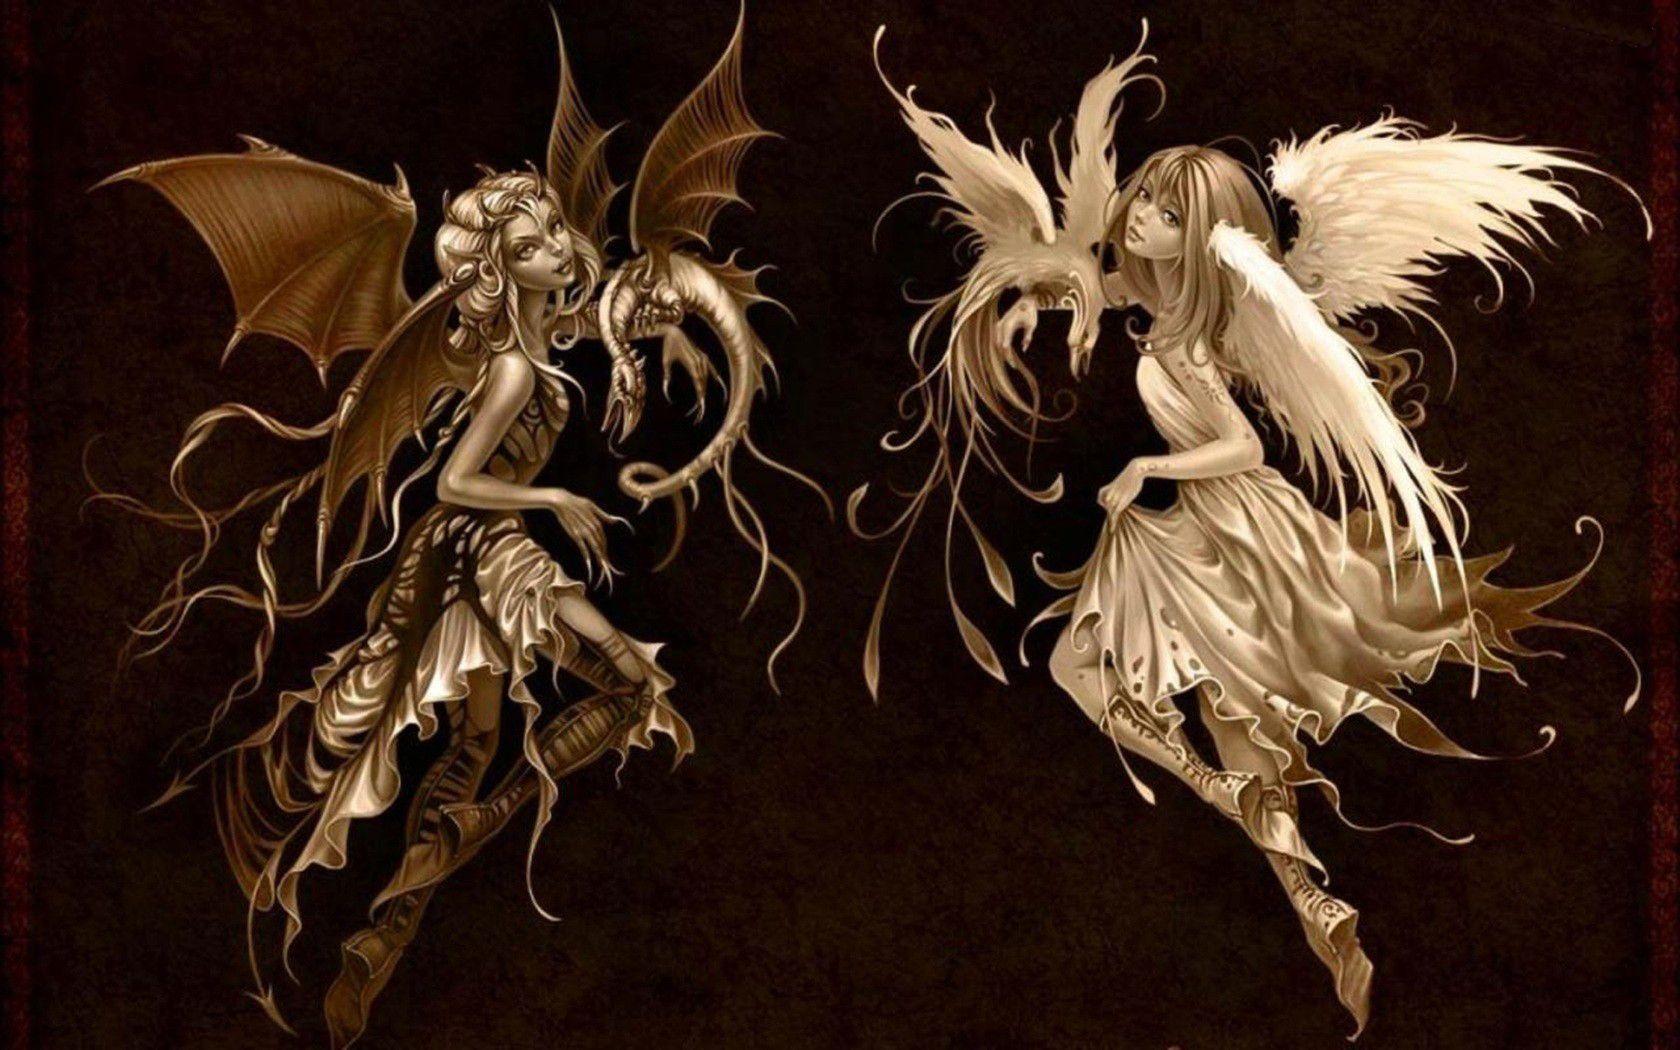 Download the Good and Evil Fairy Wallpaper, Good and Evil Fairy